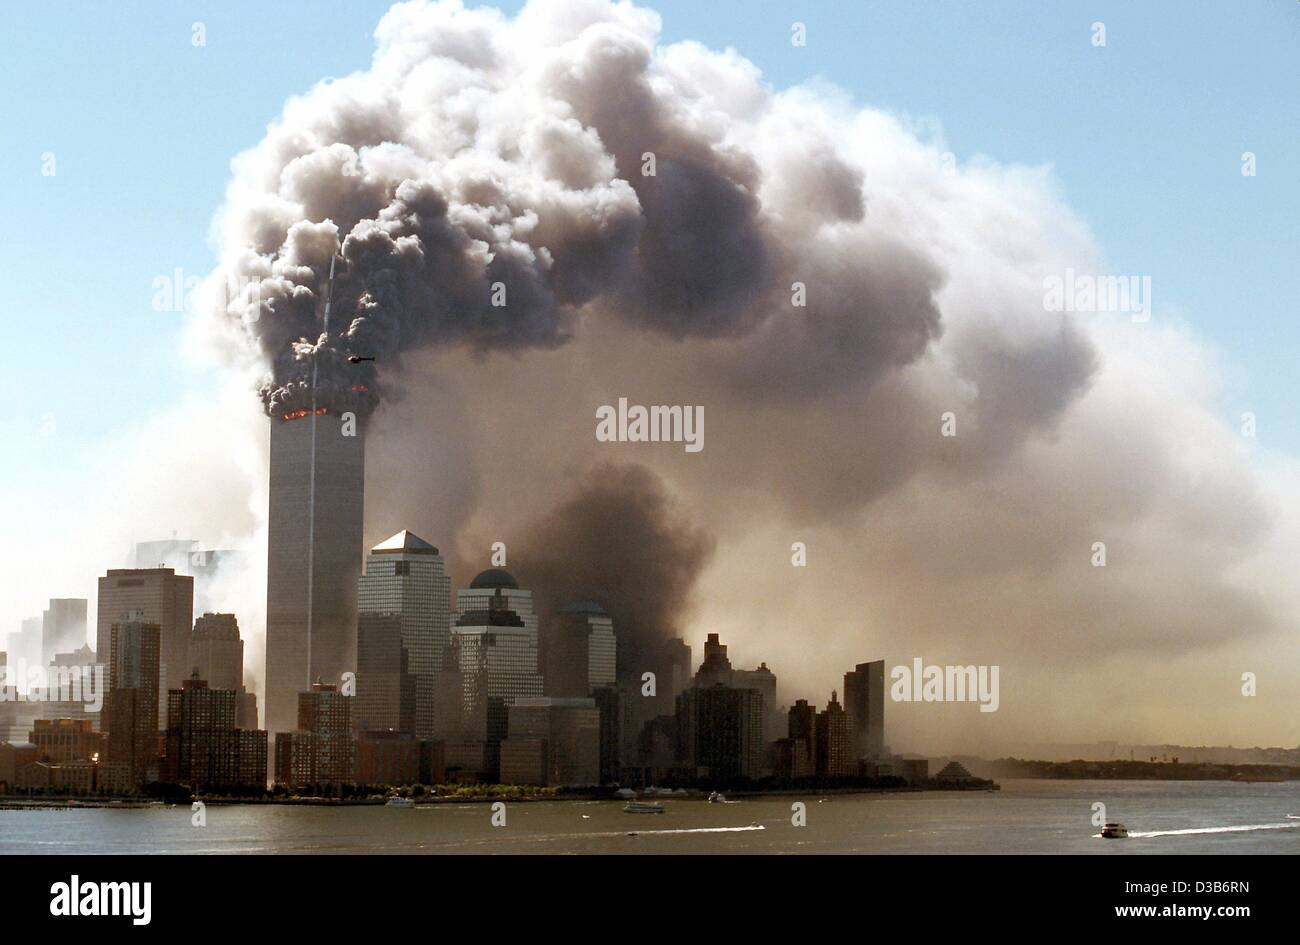 (dpa) - Clouds of smoke rise from the burning upper floors just before the twin towers of the World Trade Center in New York collapse, 11 September 2001. 2,823 people were killed when Islamic terrorists crashed into the WTC with highjacked planes. Together with 189 dead in the Pentagon attack of pla Stock Photo